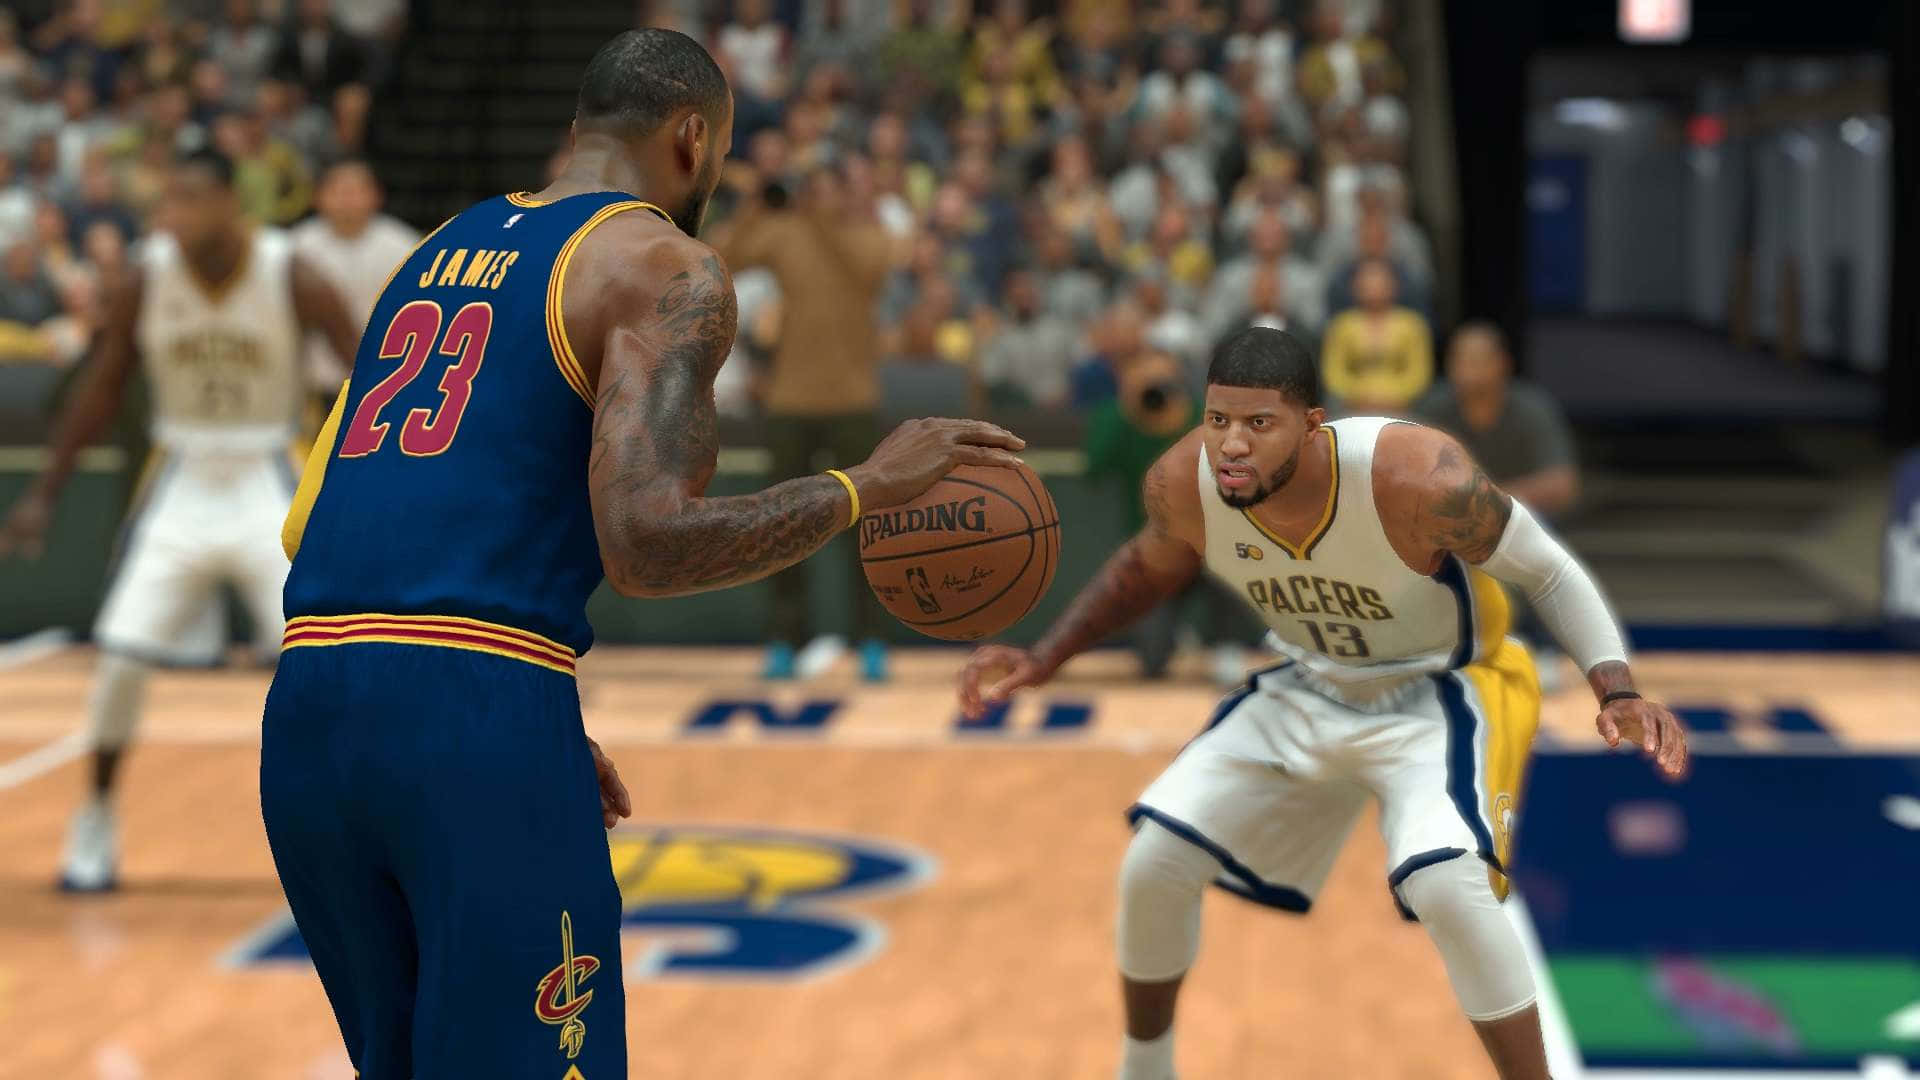 Take Your Basketball Game To New Heights With Nba 2k And The Latest Edition Of Its Groundbreaking Series